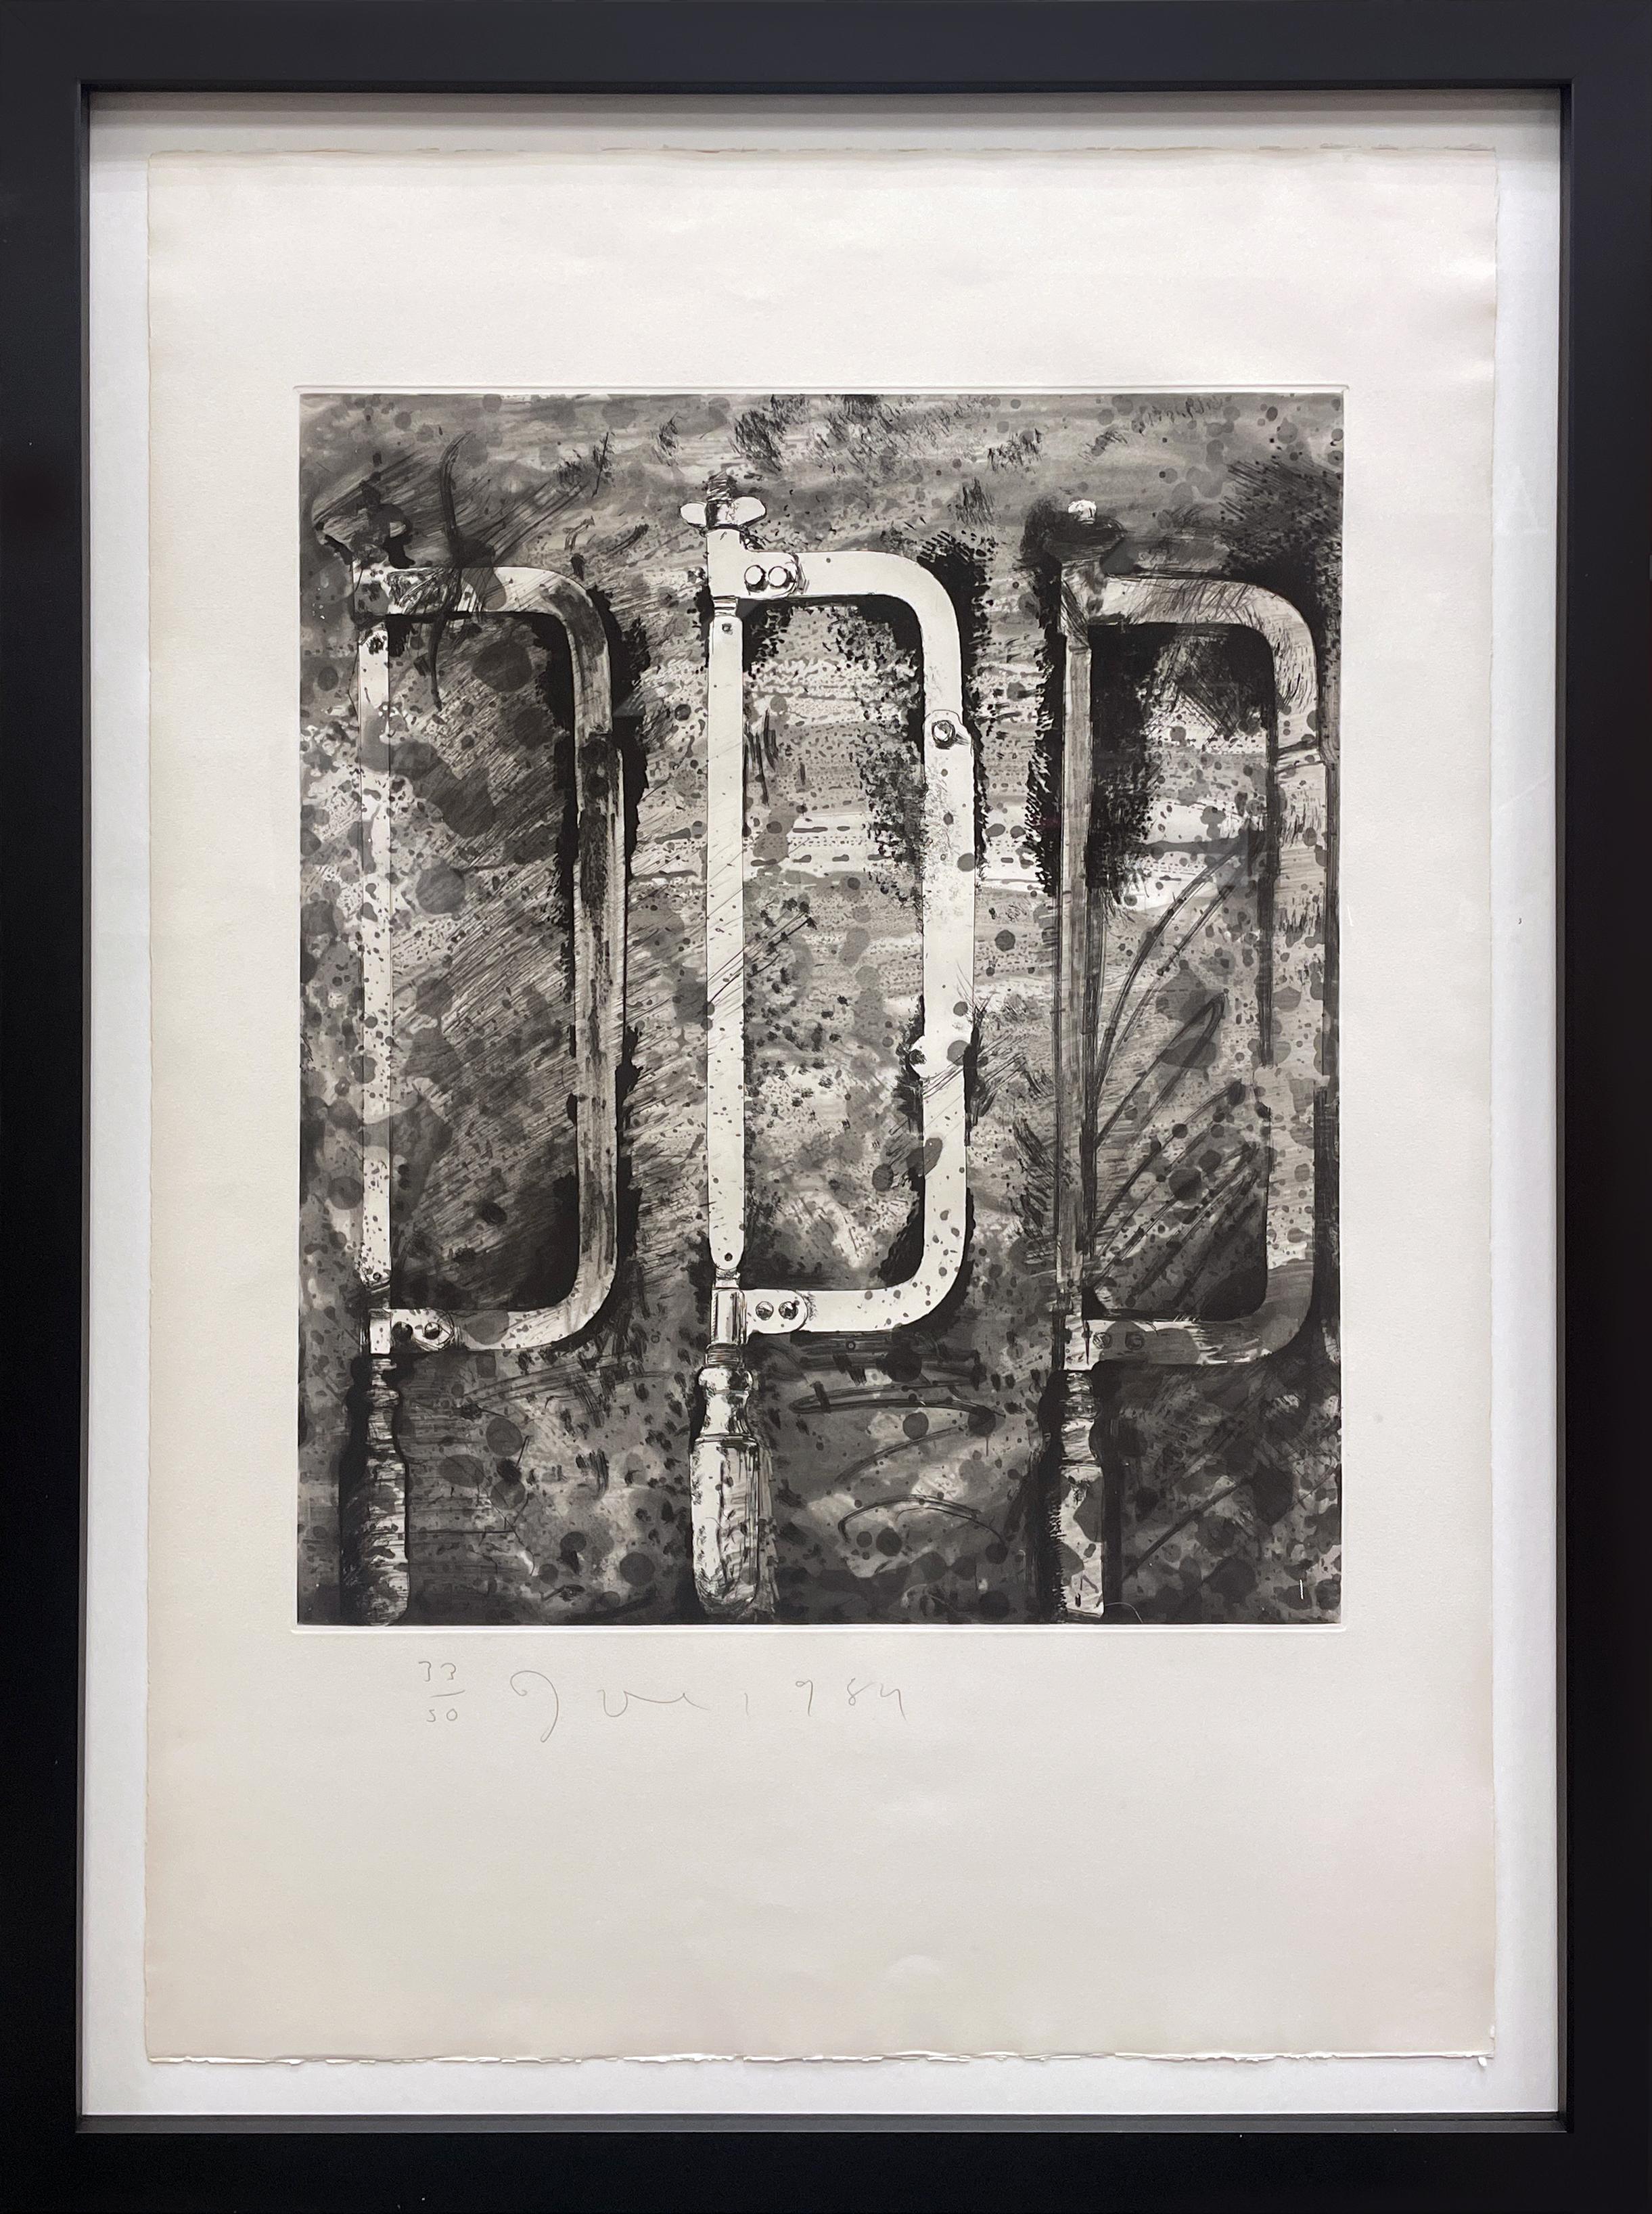 Jim Dine Abstract Print - "The New French Tools 2 - Three Saws from the Rue Cler"